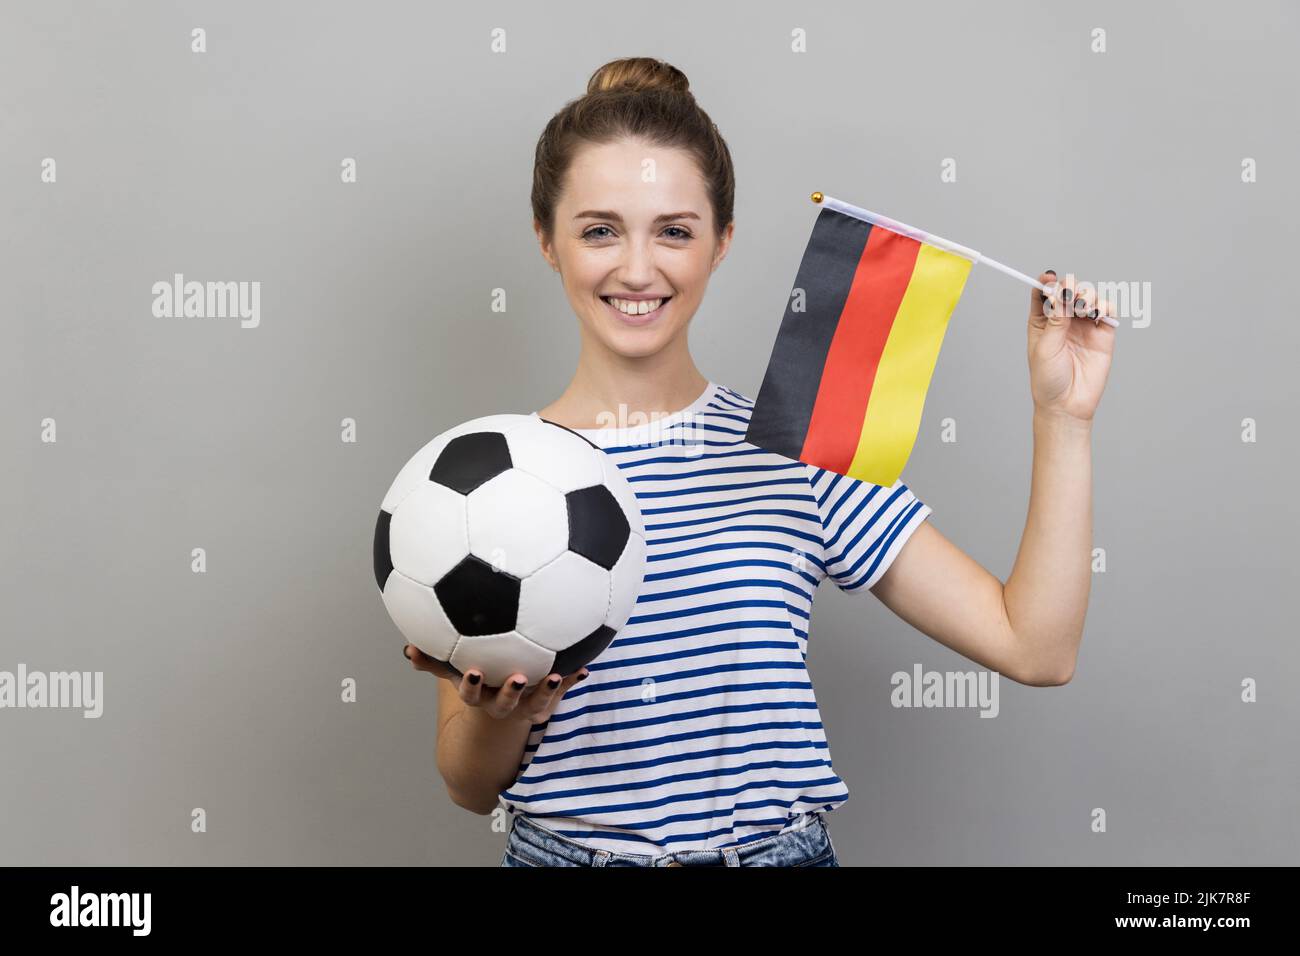 Portrait of joyful cheerful woman wearing striped T-shirt holding soccer ball and german flag, looking smiling at camera, cheering up. Indoor studio shot isolated on gray background. Stock Photo